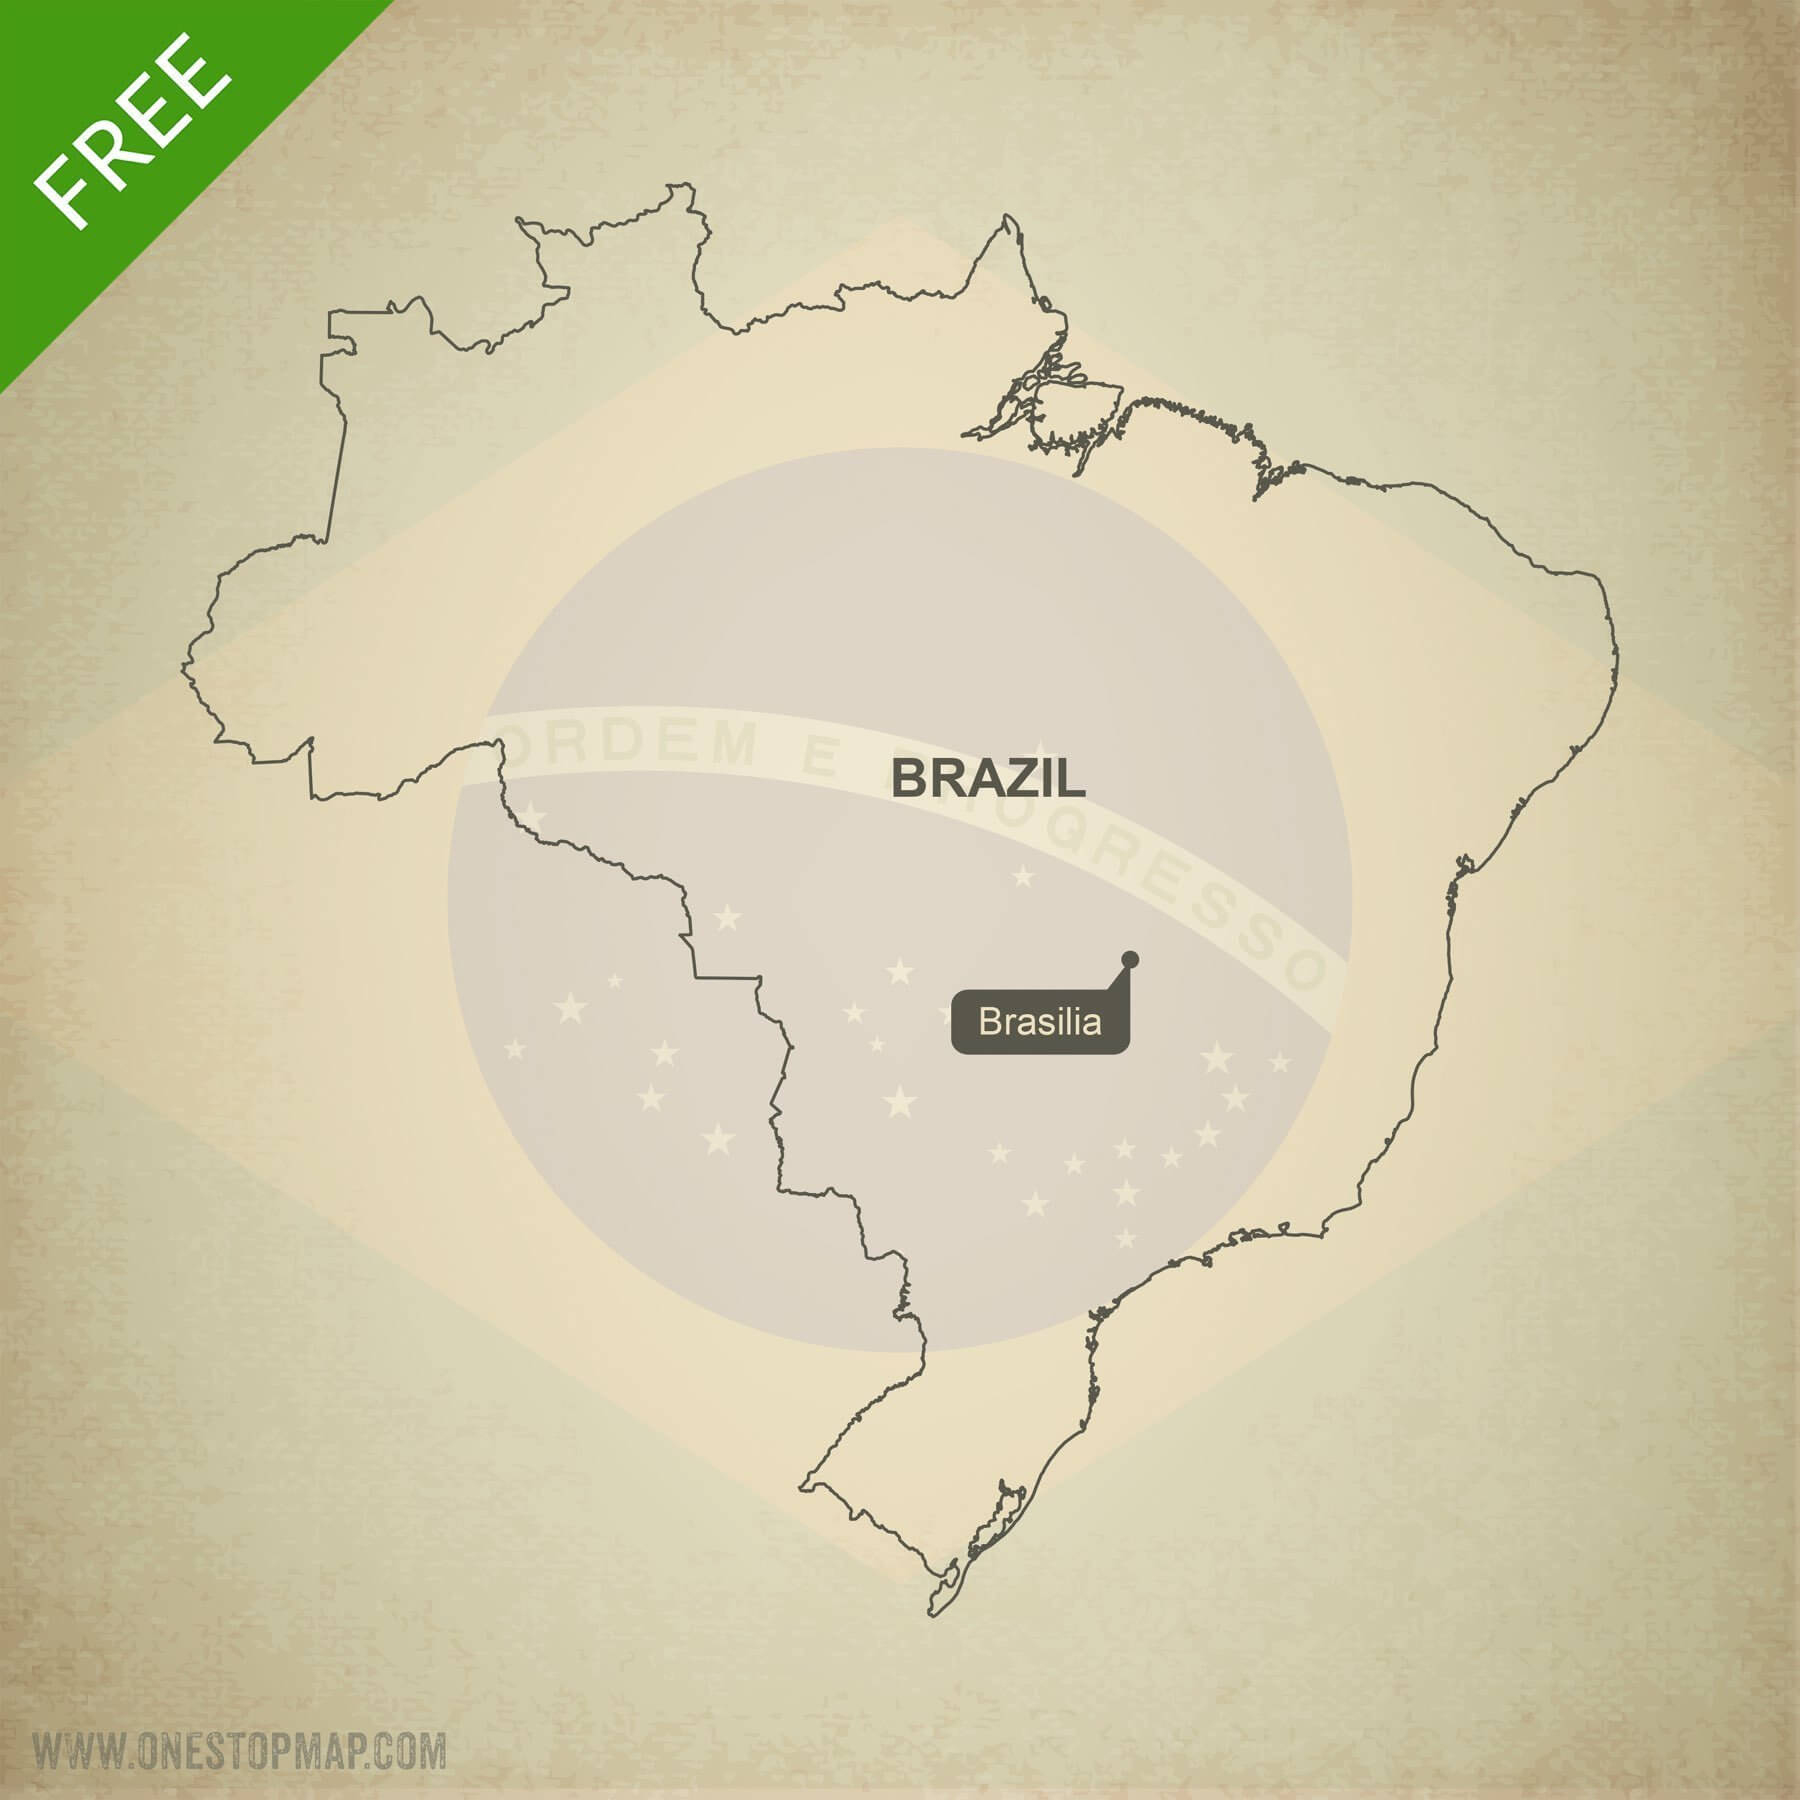 Free Vector Map Of Brazil Outline | One Stop Map - Free Printable Map Of Brazil